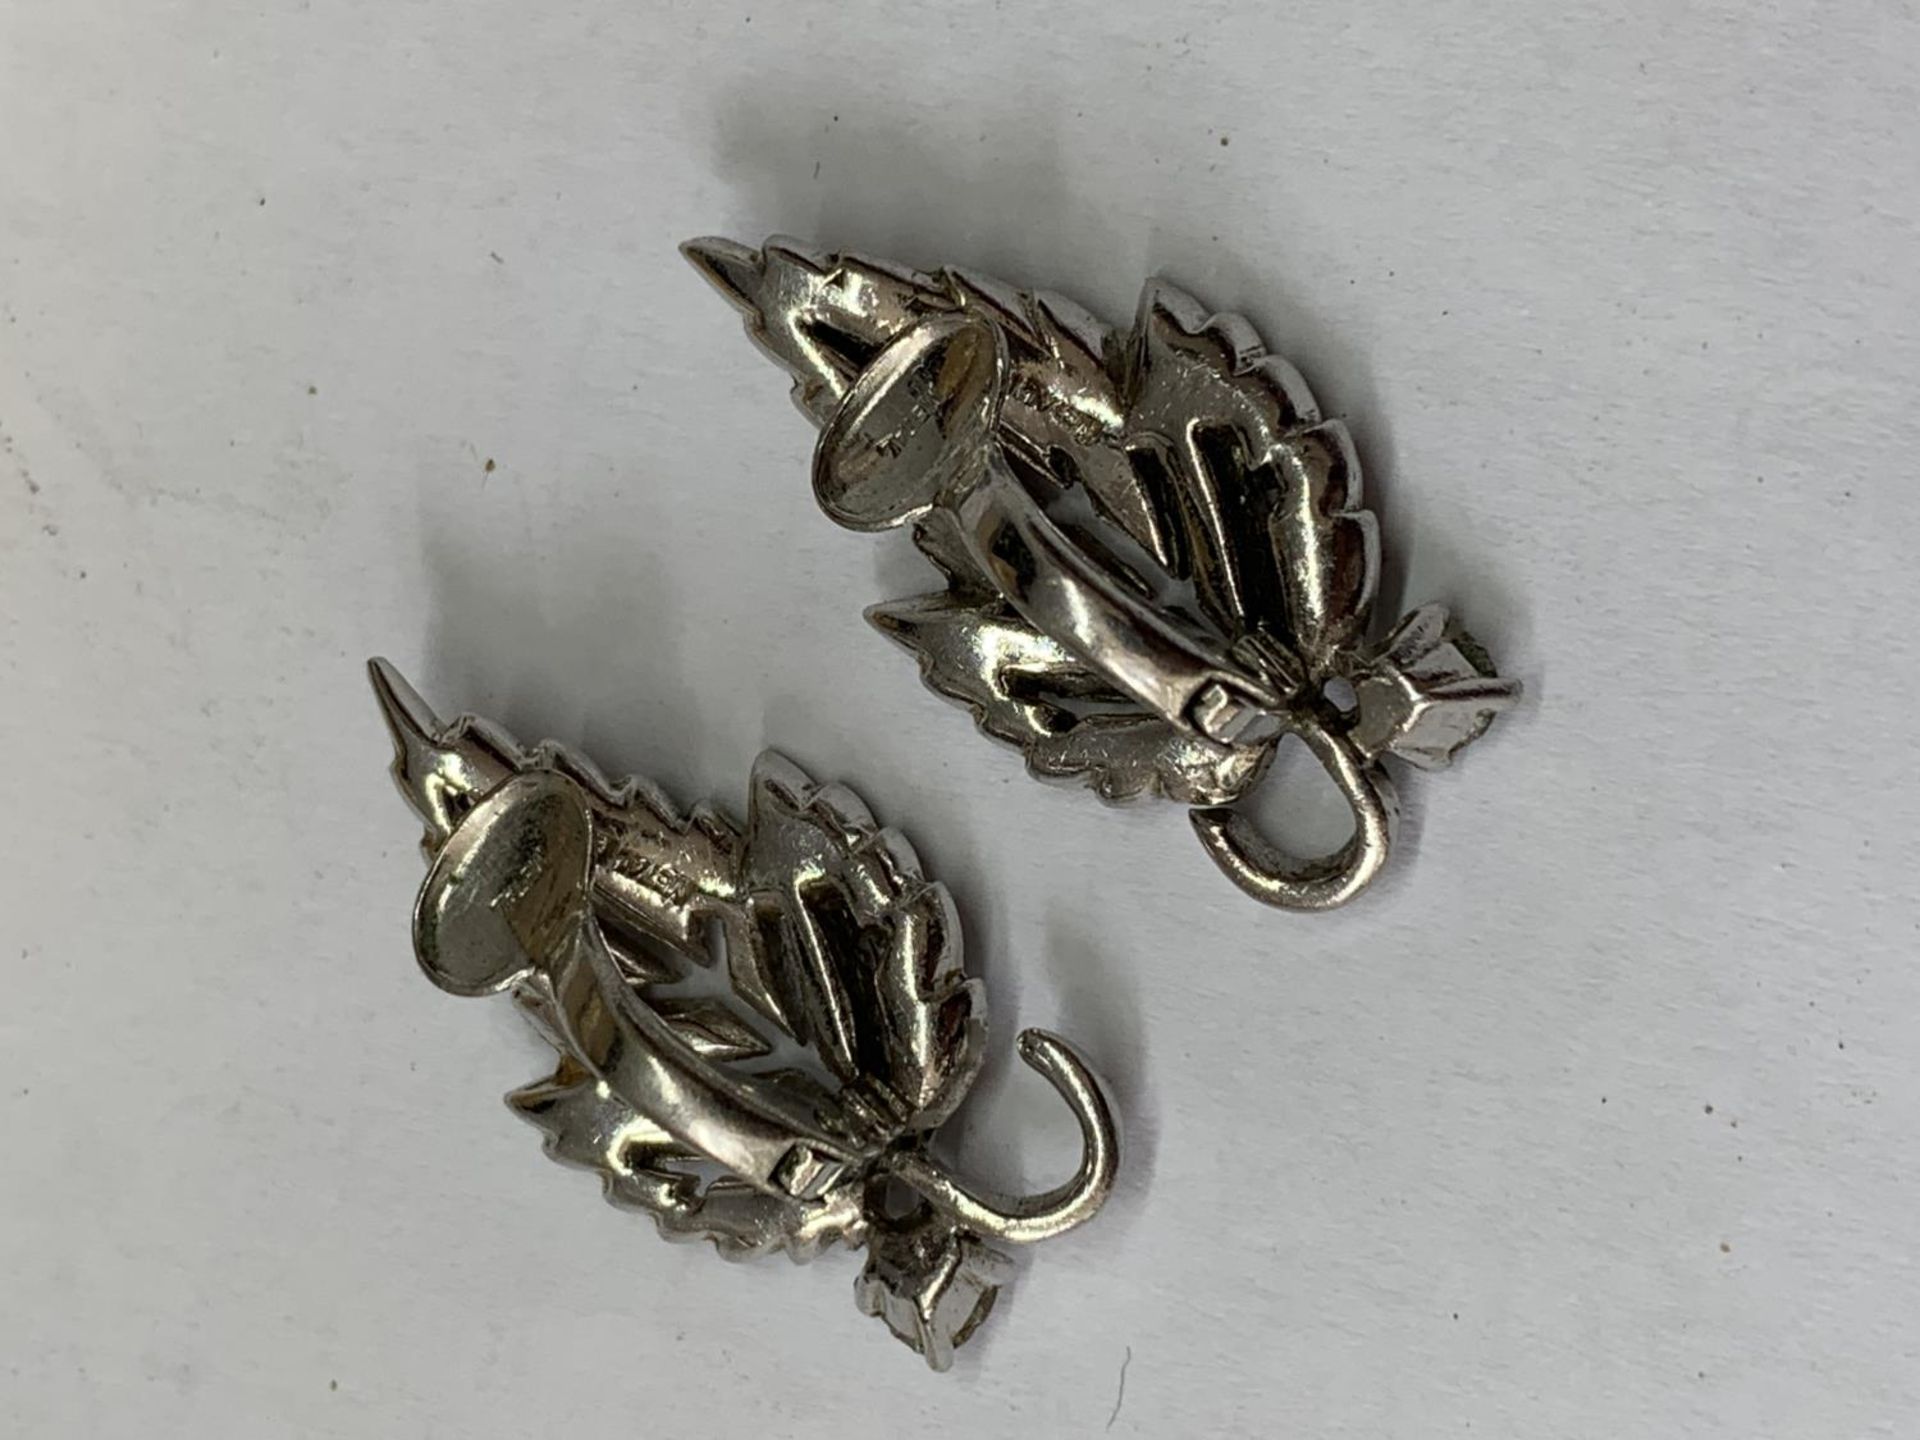 A PAIR OF 1940'S METAL RHODIUM AND CLEAR STONE EARRINGS IN A LEAF DESIGN WITH PRESENTATION BOX - Image 3 of 3